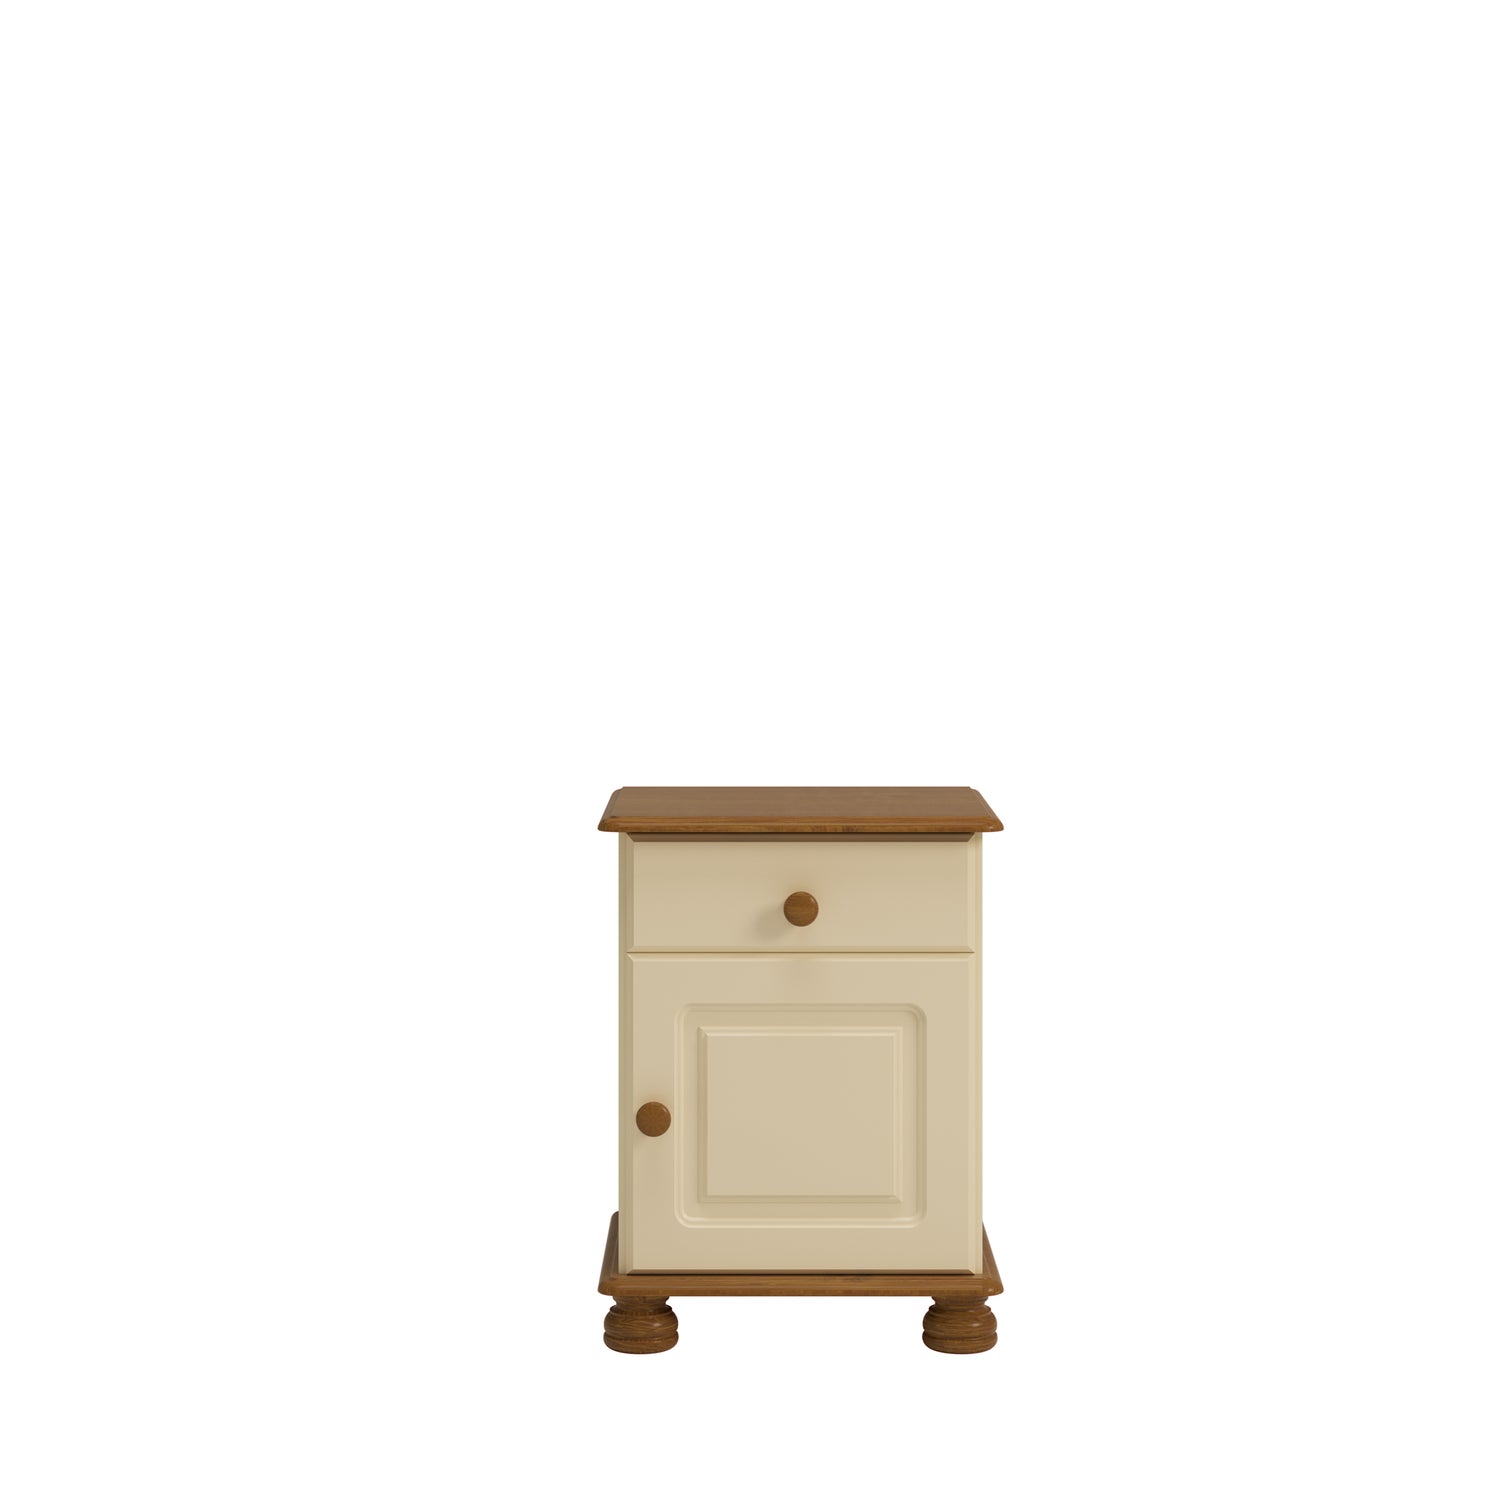 Steens Richmond Cream And Pine 1 Draw 1 Door Bed Side Table